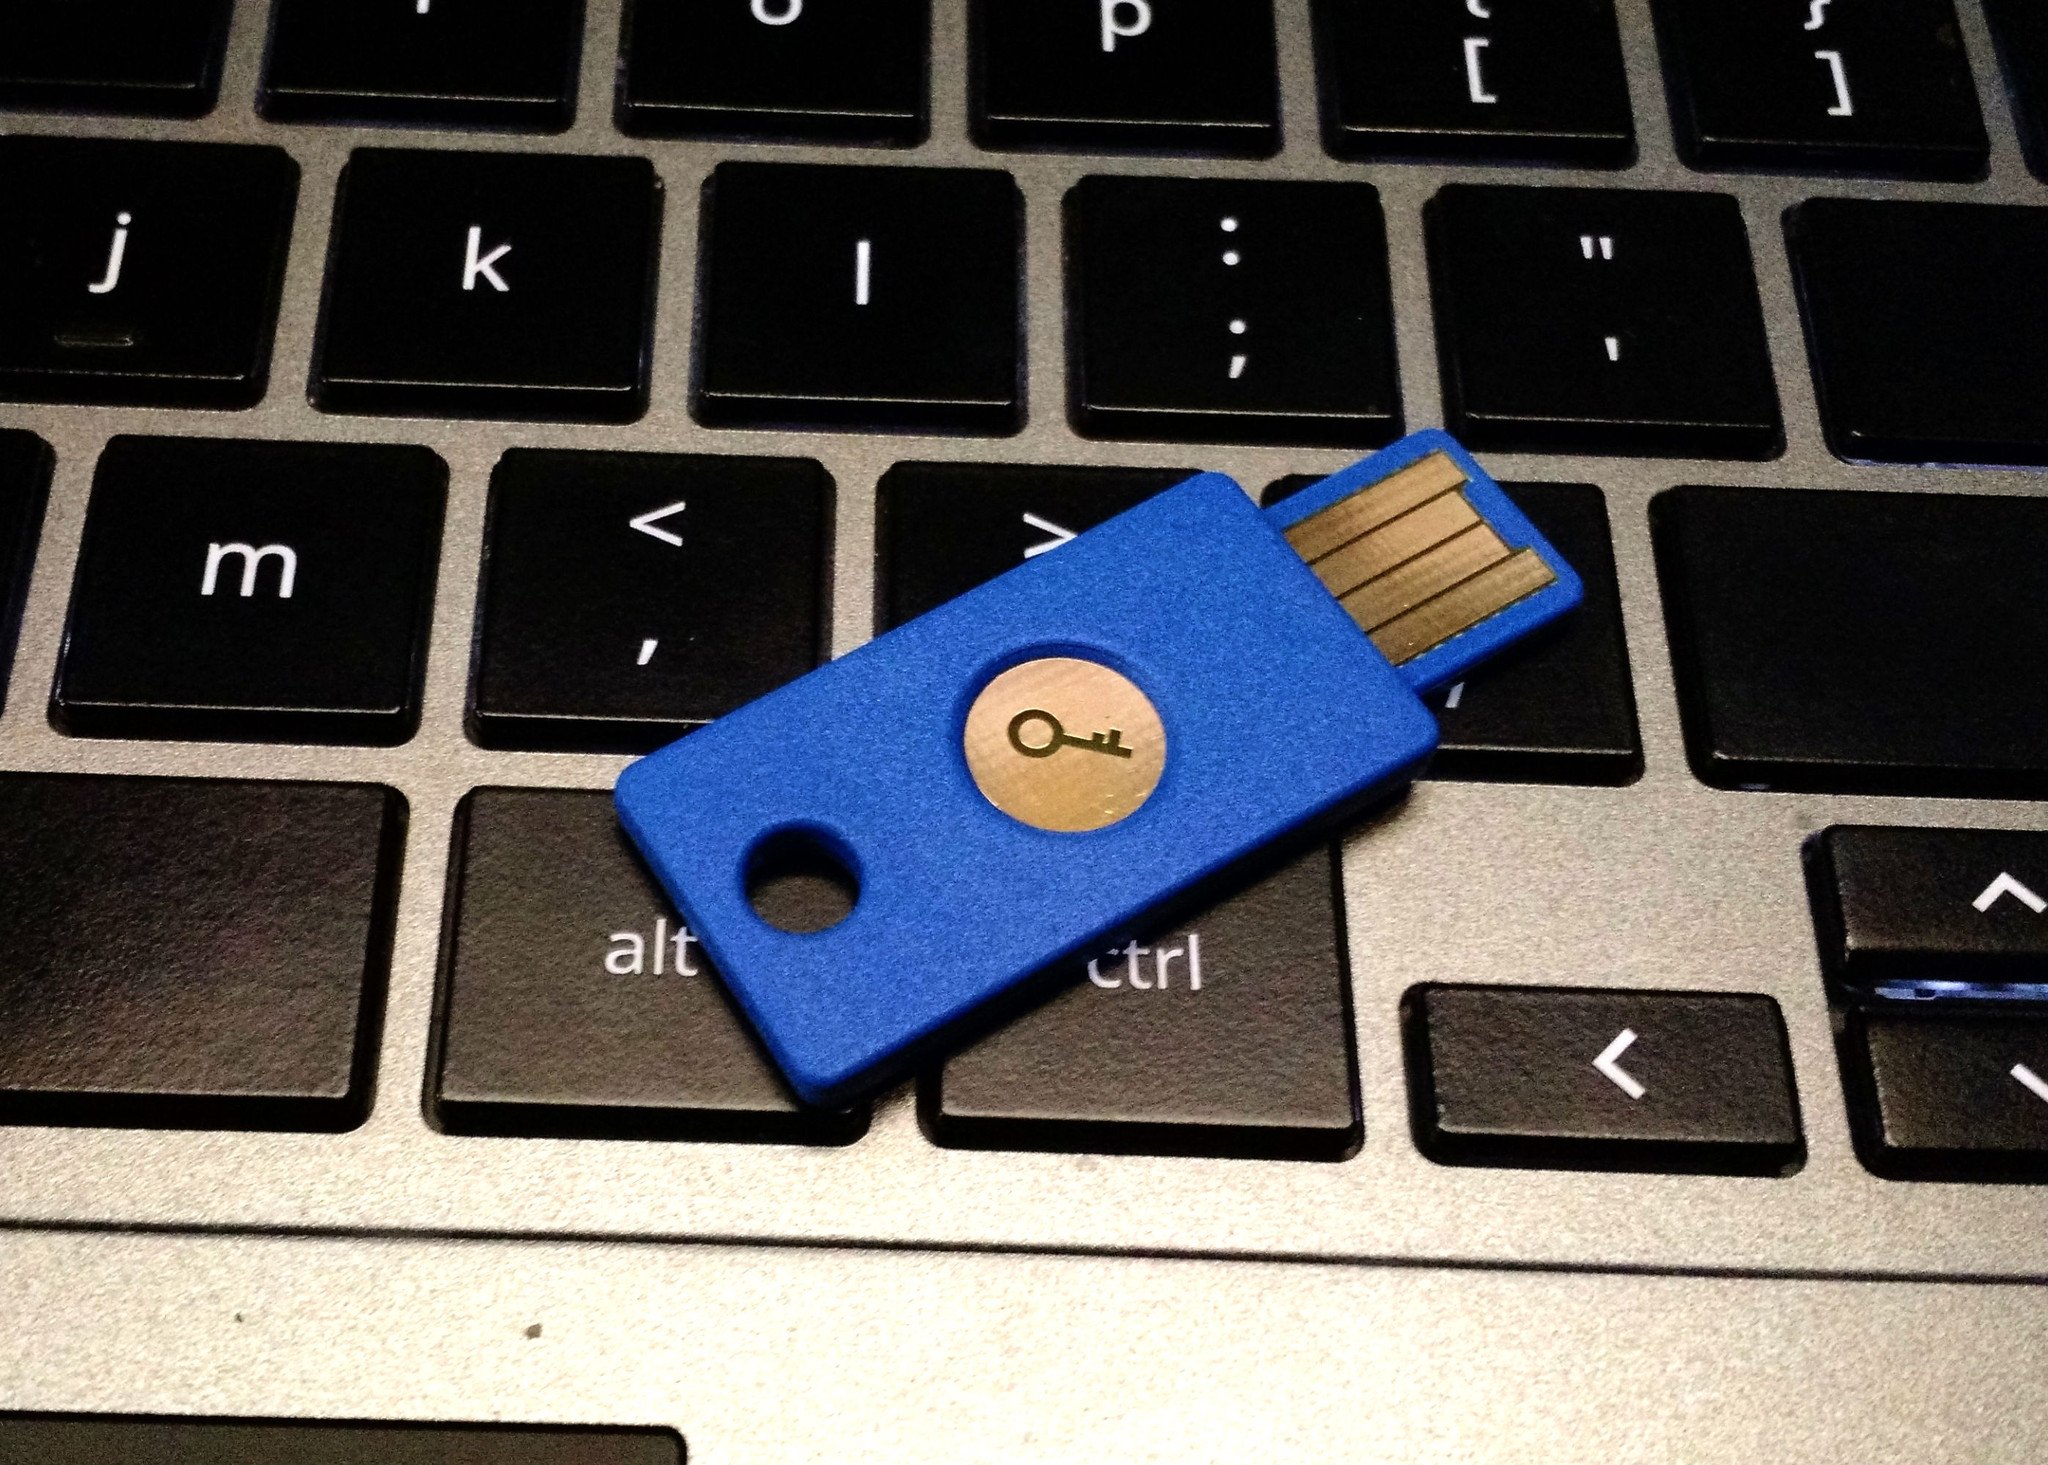 Google Apps for Work customers can snag a Yubico security key $9